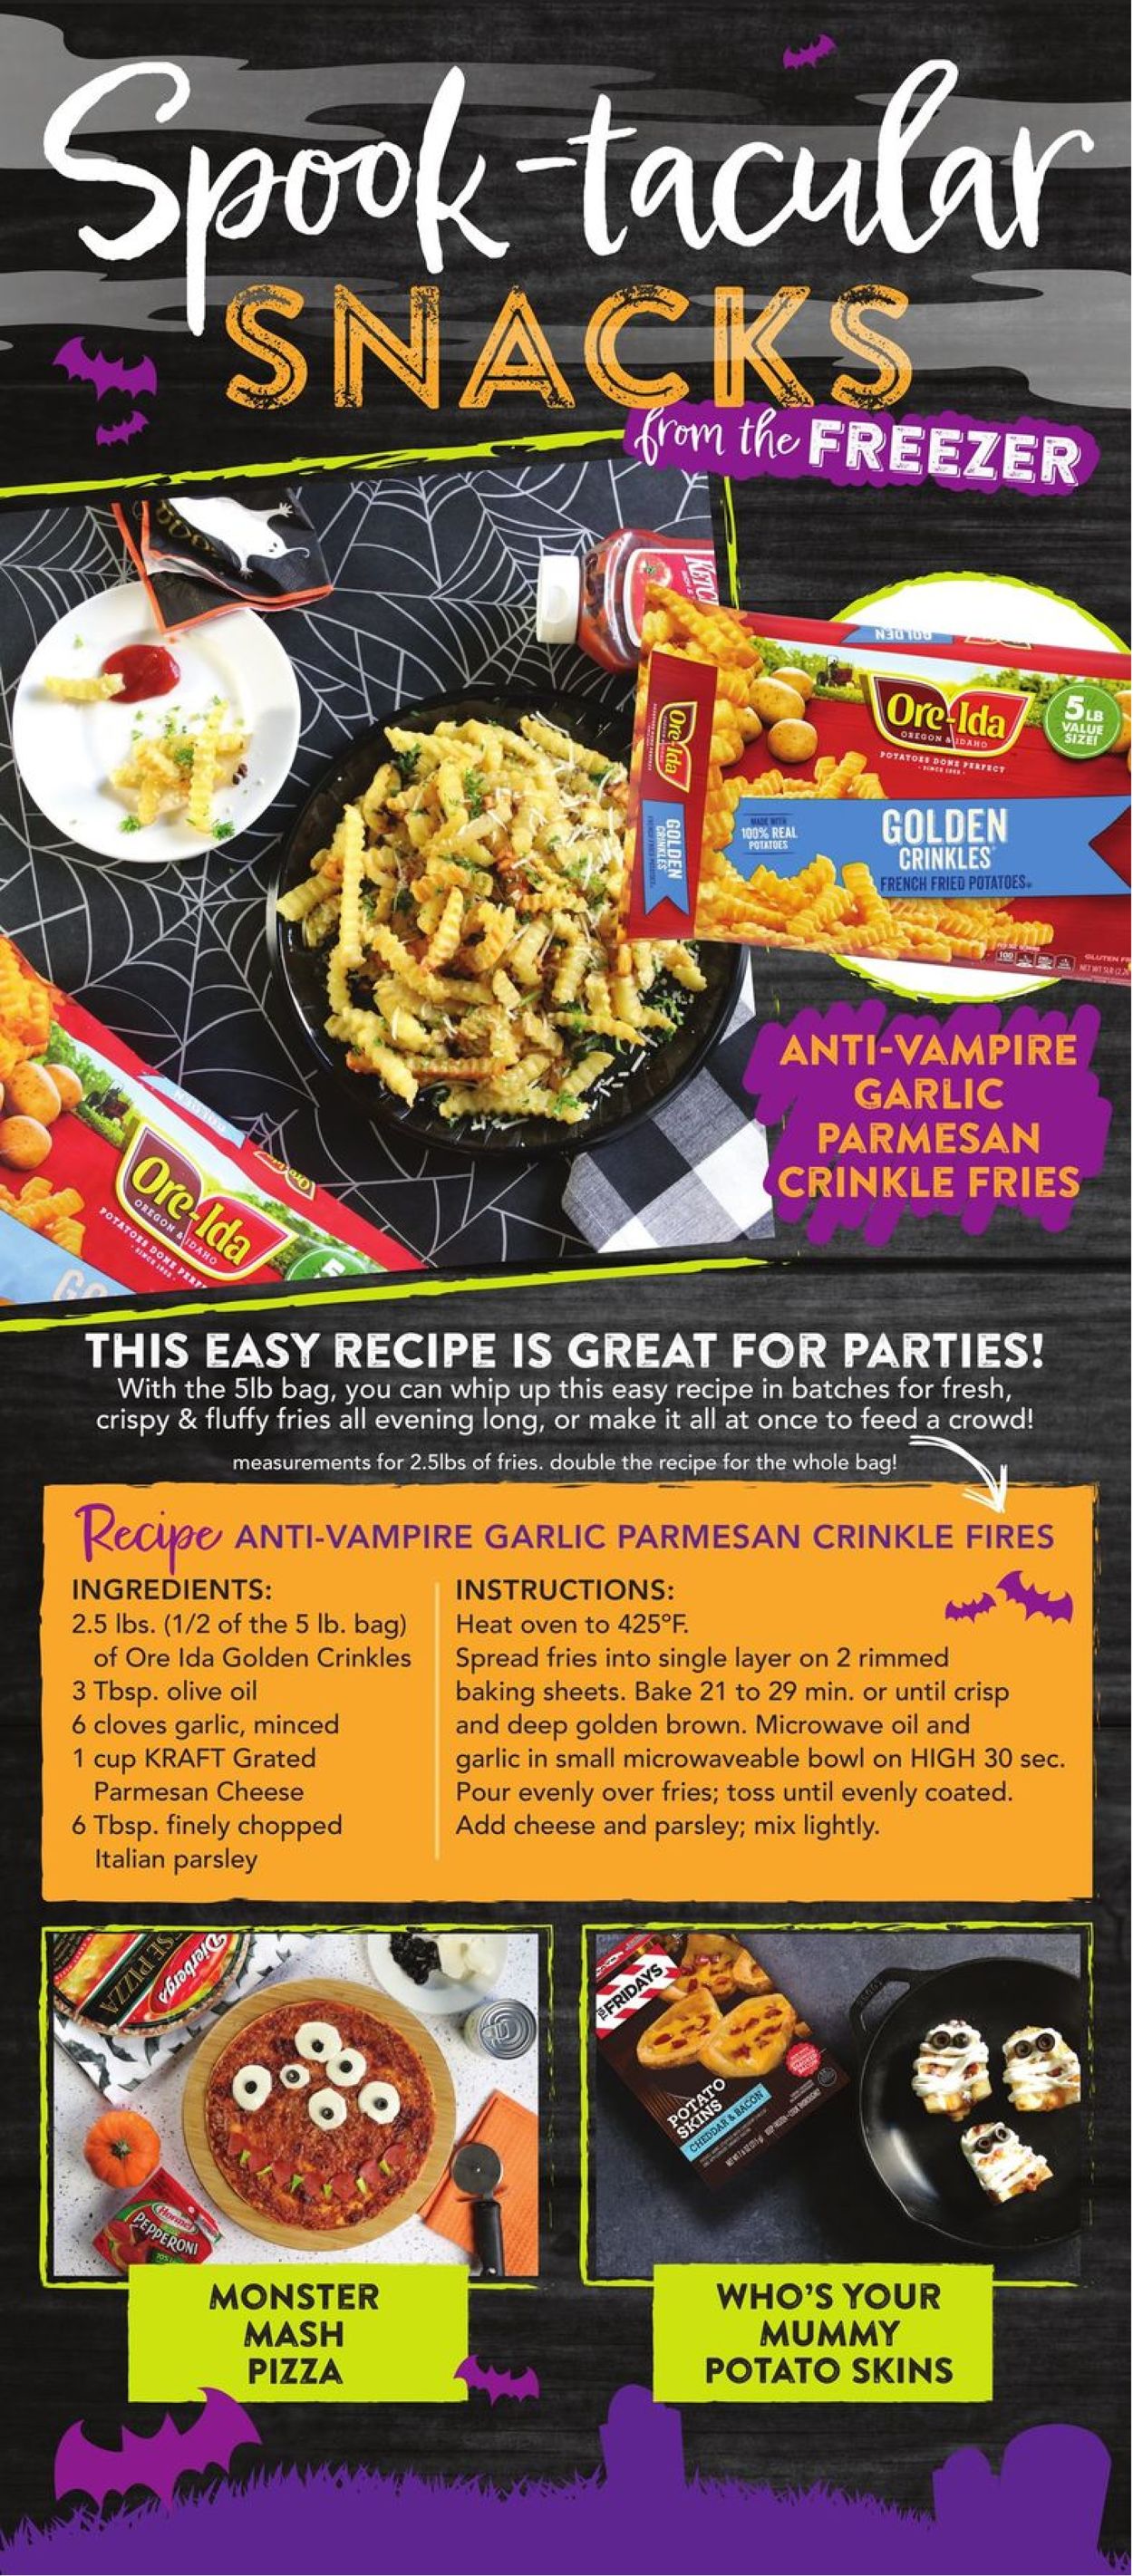 Dierbergs Ad from 10/26/2021